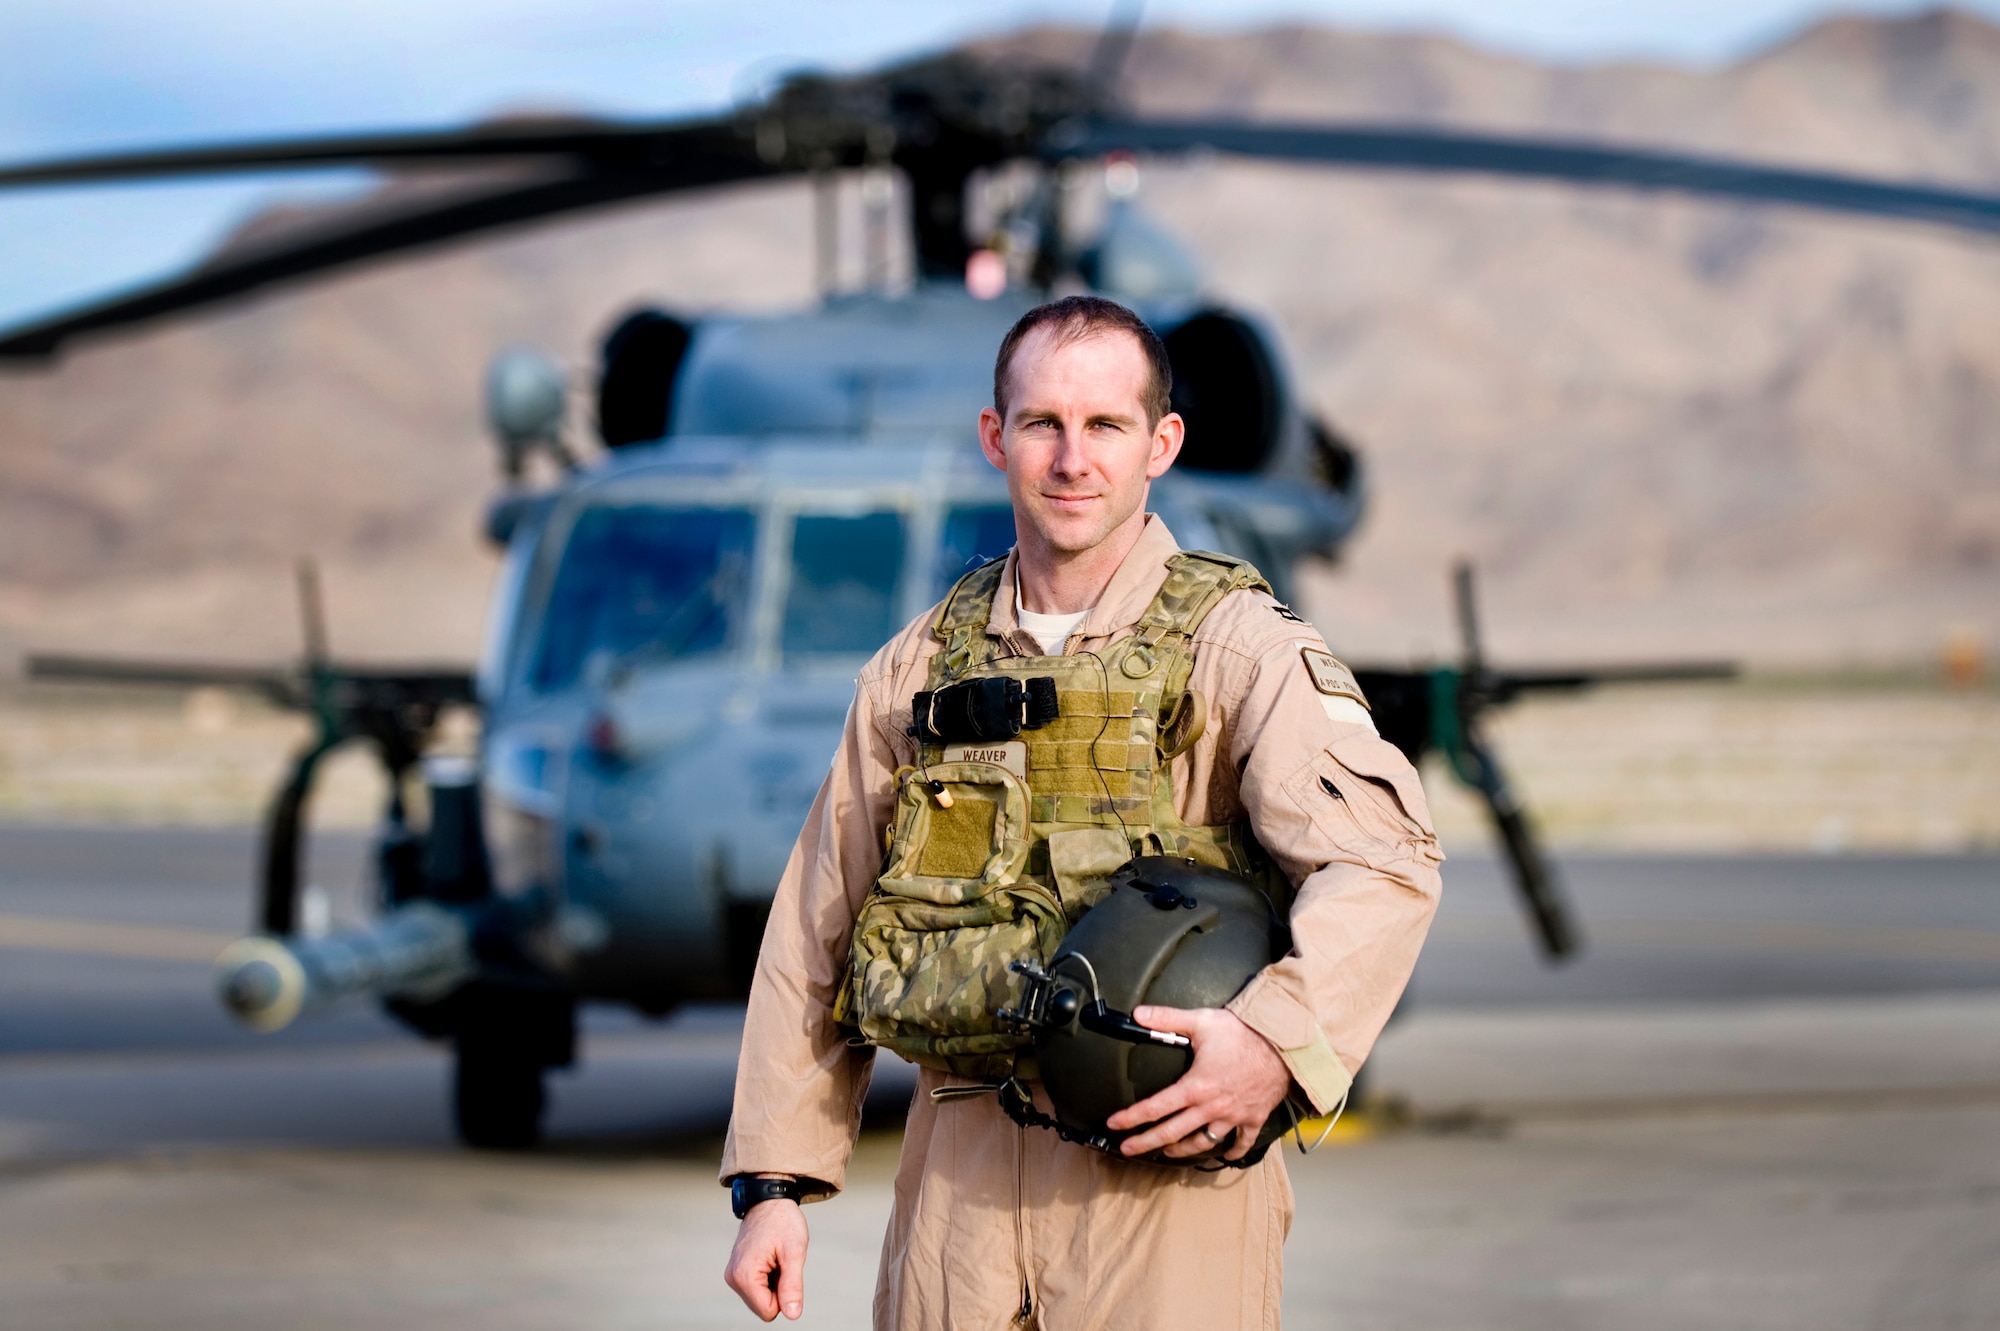 U.S. Air Force Capt. Kevin Weaver, 66th Rescue Squadron helicopter pilot, stands next to a HH-60 Pavehawk helicopter, April 12, 2012, at Nellis Air Force, Nev. Capt Weaver was awarded the Distinguished Flying Cross with valor for combat actions while deployed to Afghanistan. In the Watapur Valley, Afghanistan, Capt. Weaver took intensive machine gun and rocket propelled grenade fire while performing a precision hover and hoist to evacuate eleven casualties. While under fire, Capt. Weaver directed OH-58 and AH-64 weapons teams to engage three enemy positions, suppressing the threats and ensuring the successful delivery of pararescuemen. (U.S. Air Force photo by Staff Sgt. William P.Coleman)
  

